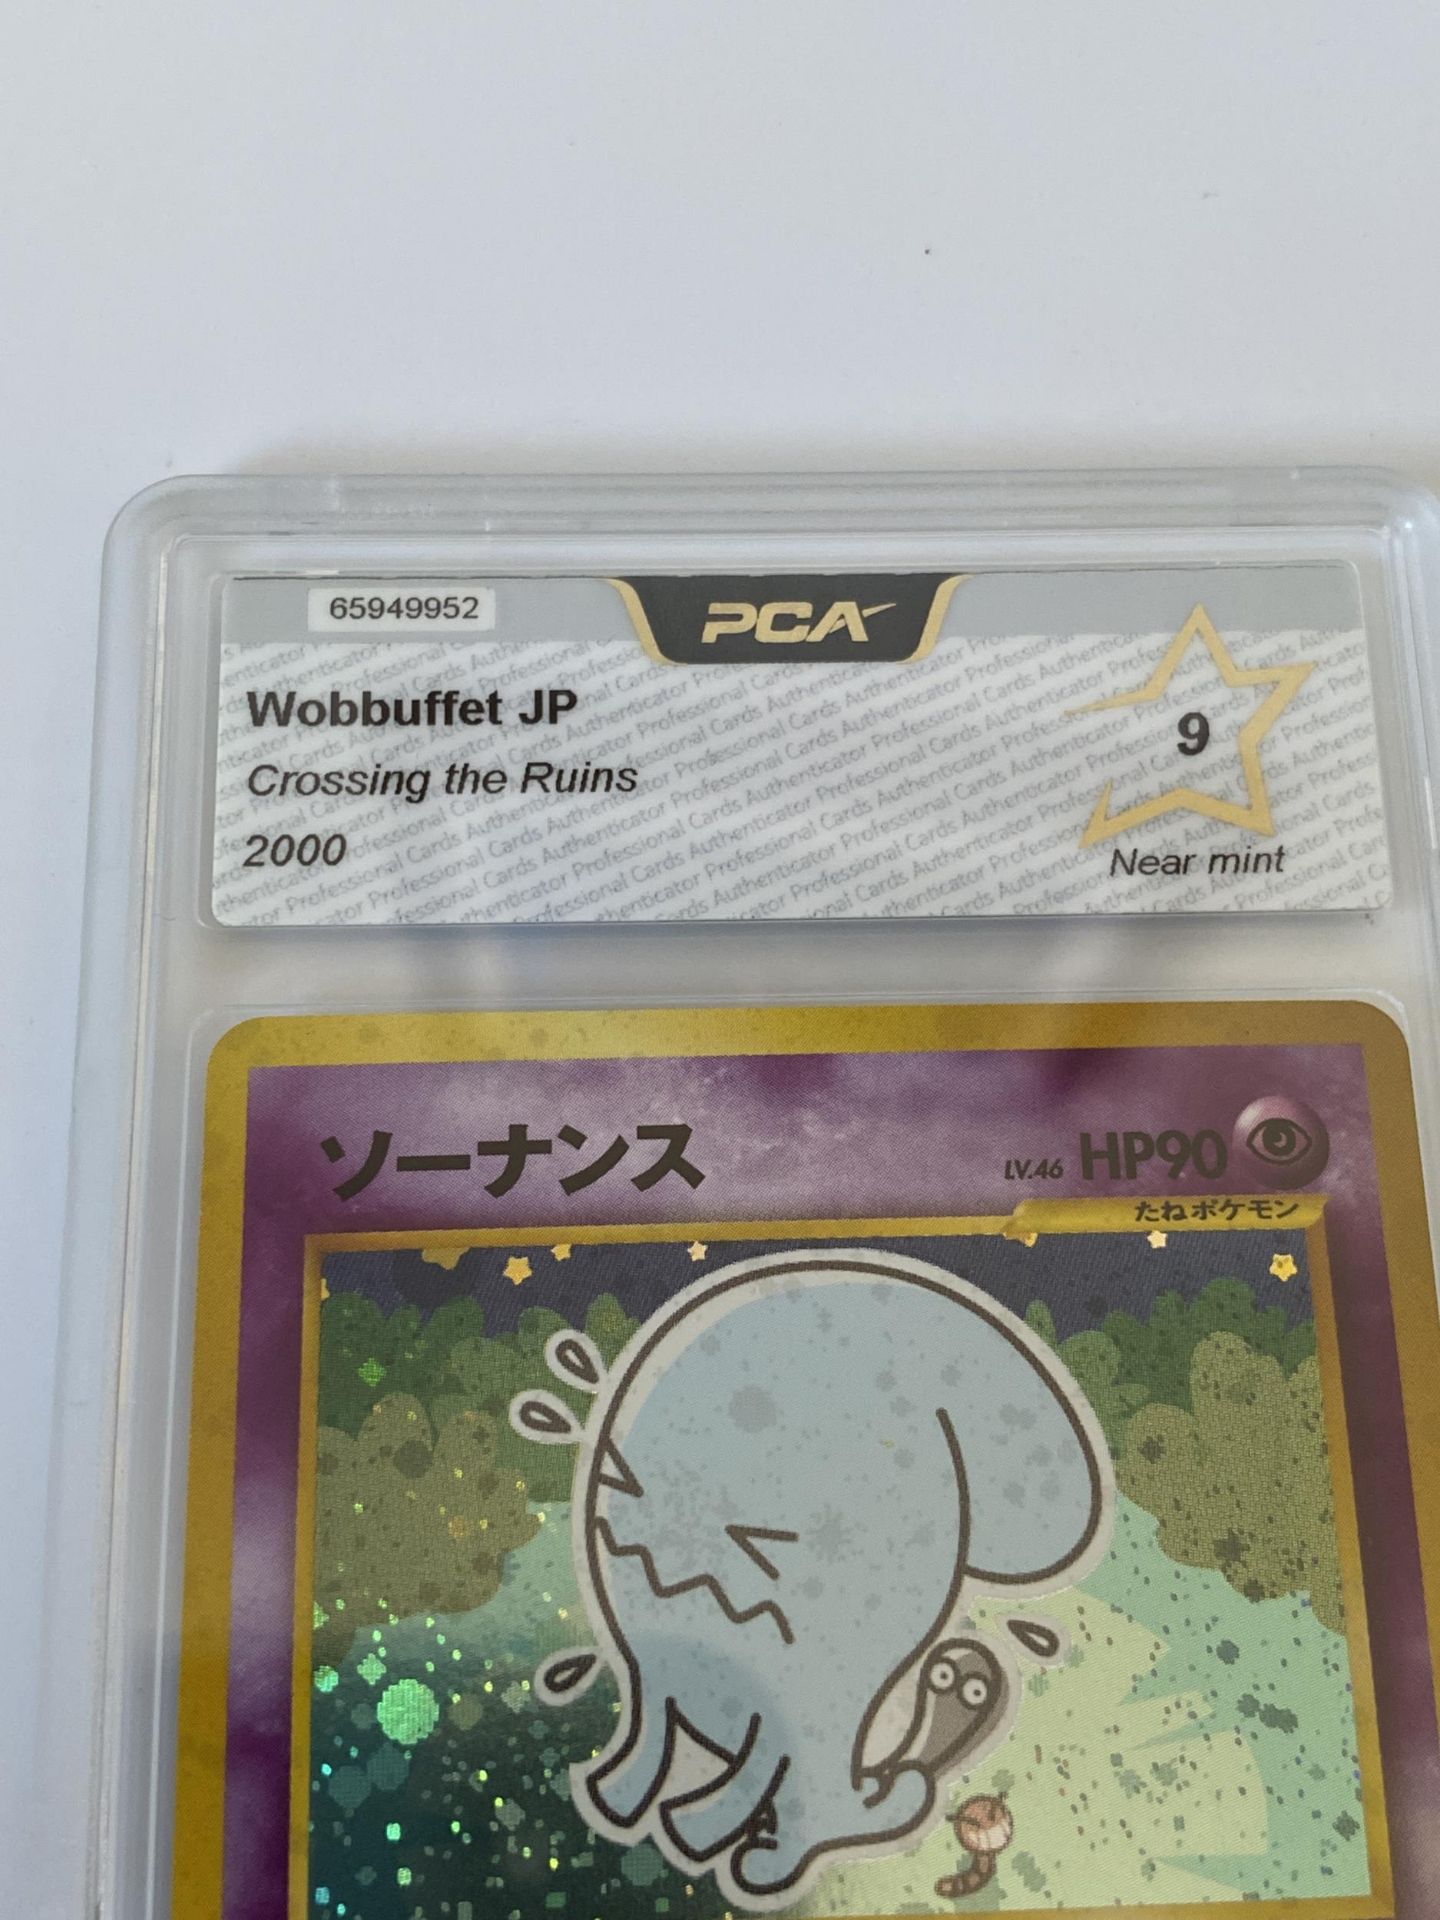 A JAPANESE GRADED POKEMON CARD -WOBBUFFET CROSSING THE RUINS - PCA GRADE - 9 - Image 2 of 3